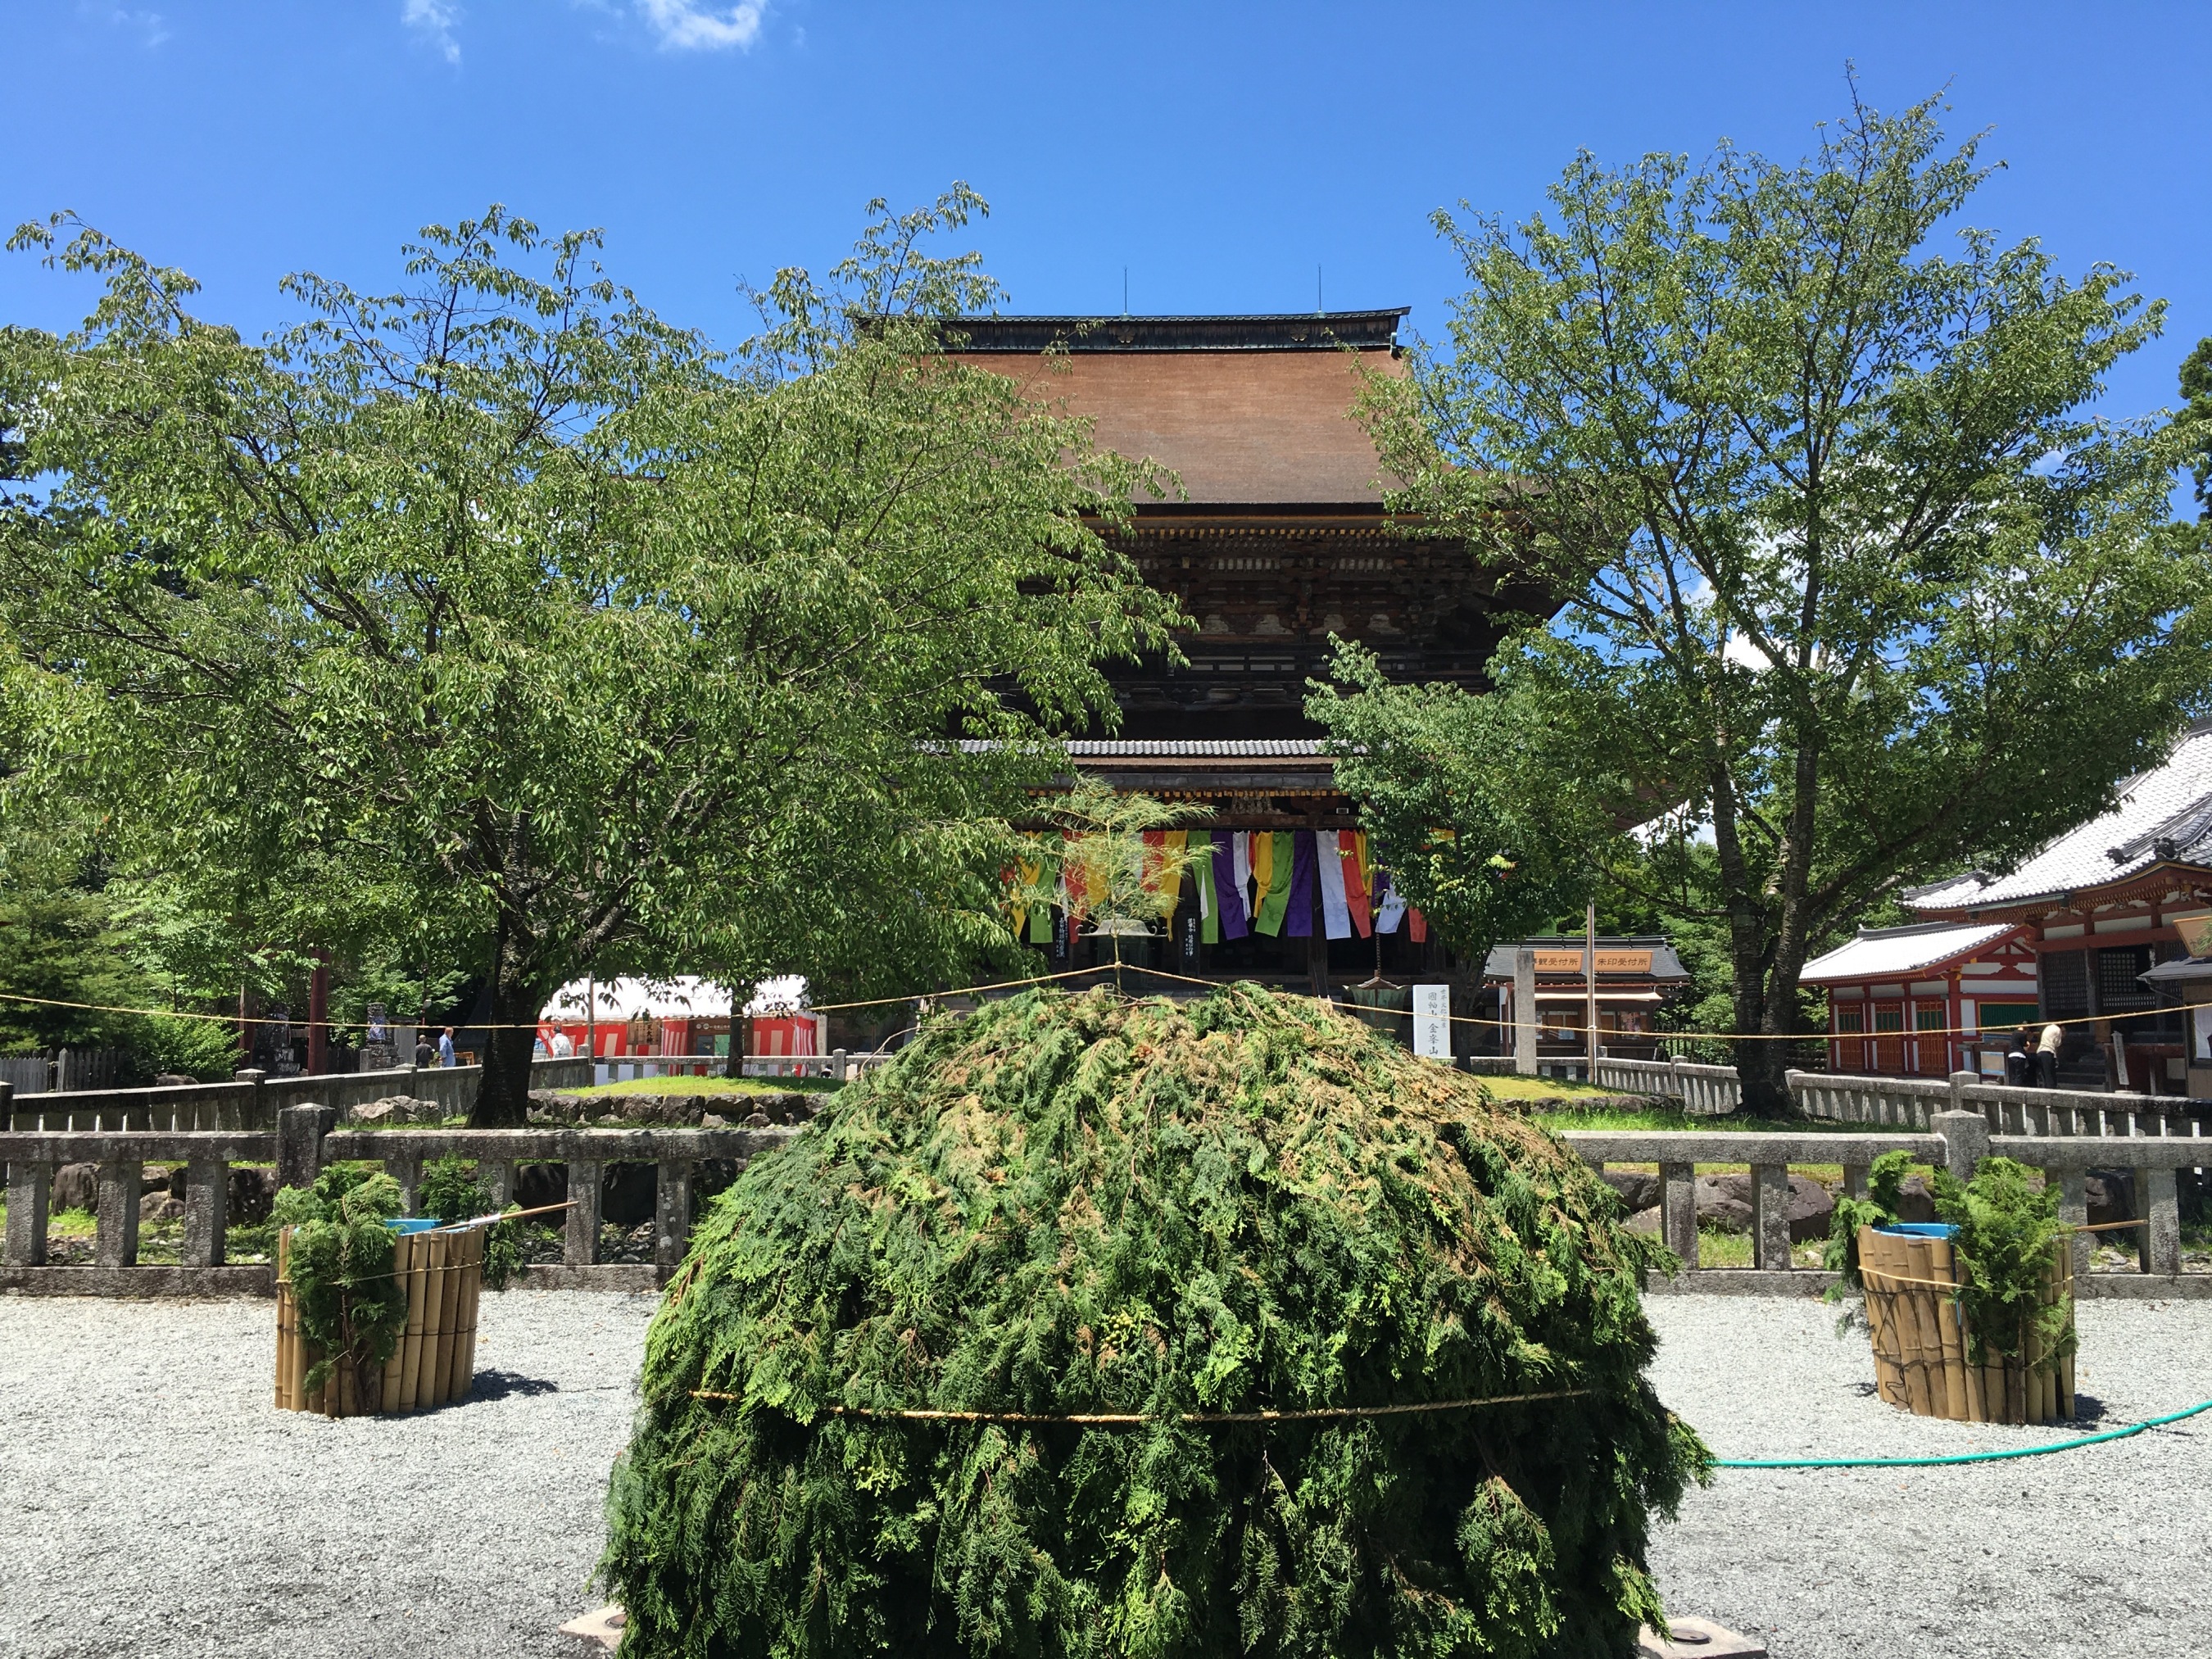 Kimpusen-ji Temple in Yoshino is the second largest wooden building in the world, after Todaiji Temple in Nara. The pile of cedar leaves in the forecourt of the Temple, which sit over a framework of wood, has been constructed in preparation for a Shugendo fire ceremony the following day.